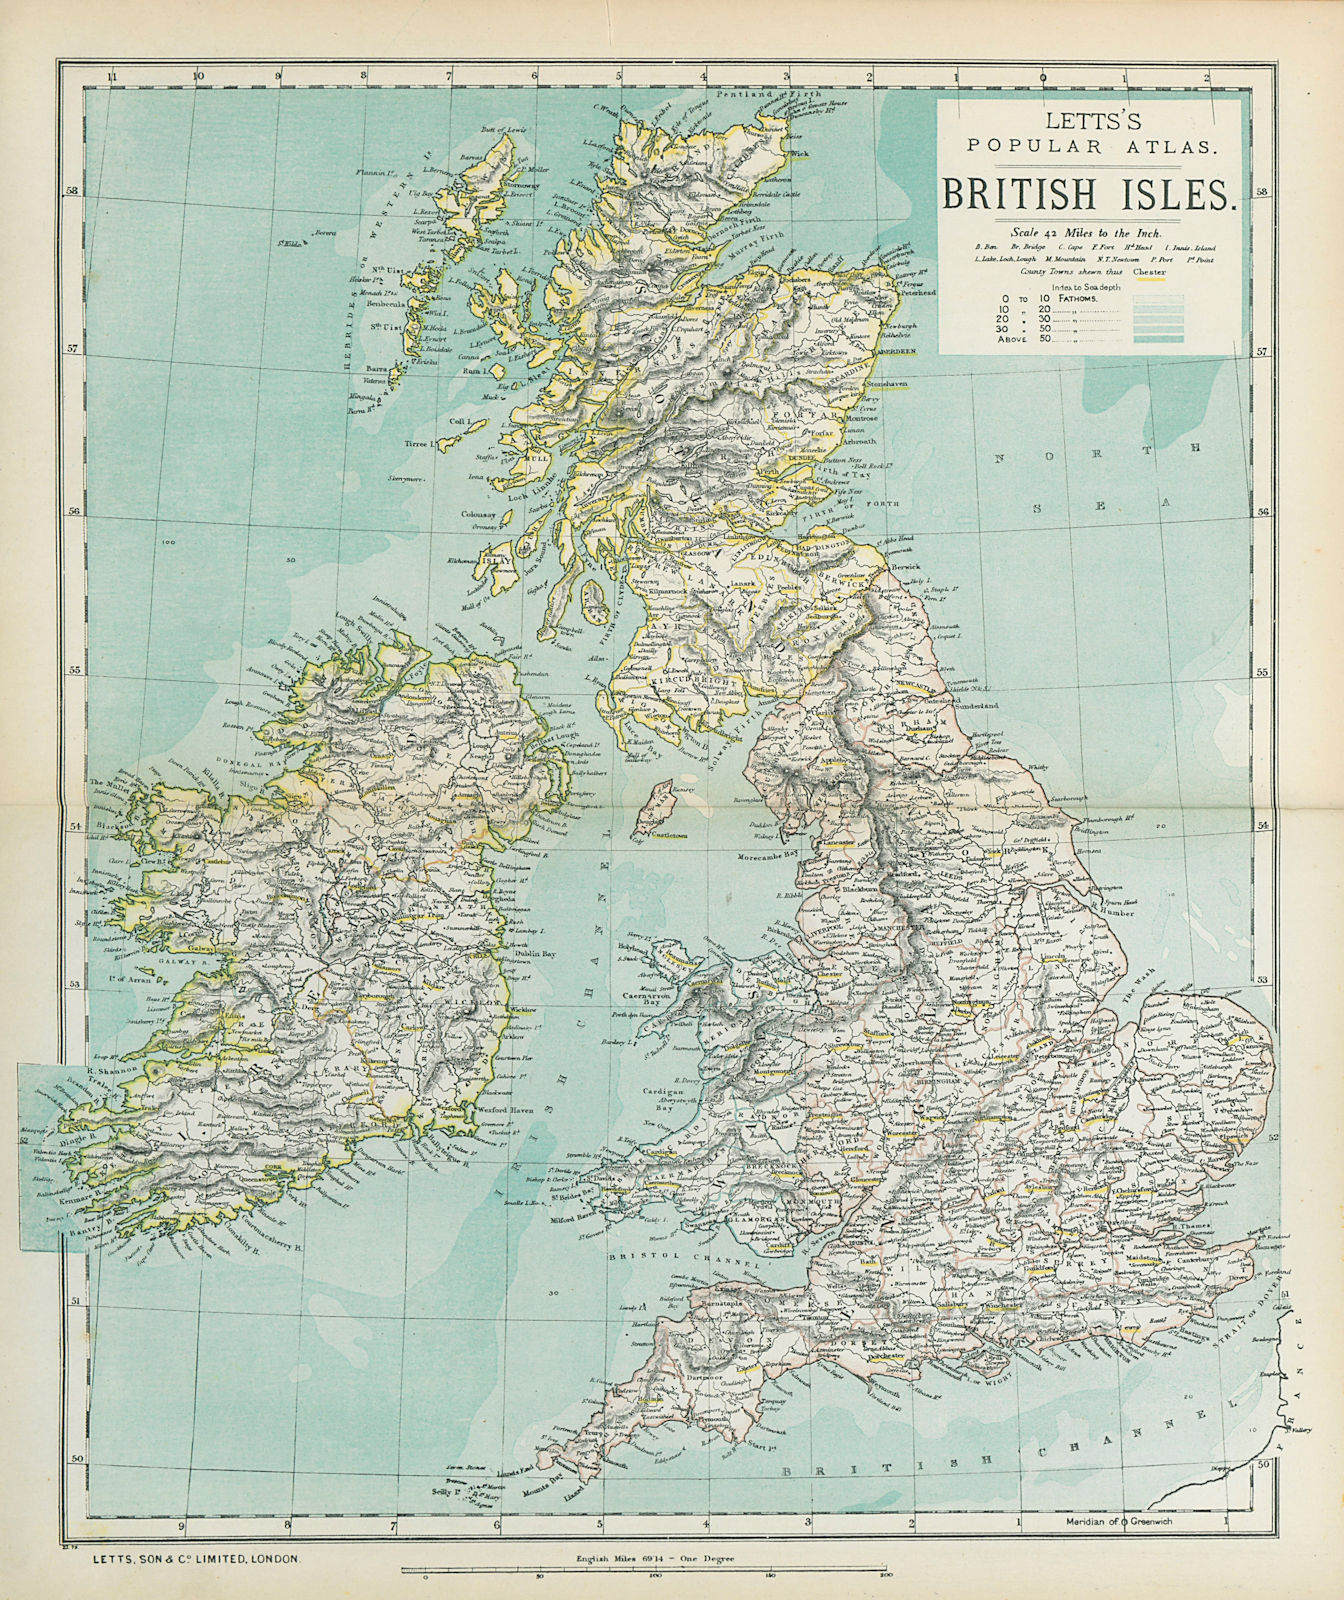 Associate Product BRITISH ISLES. United Kingdom. Ireland. Counties towns rivers. LETTS 1883 map